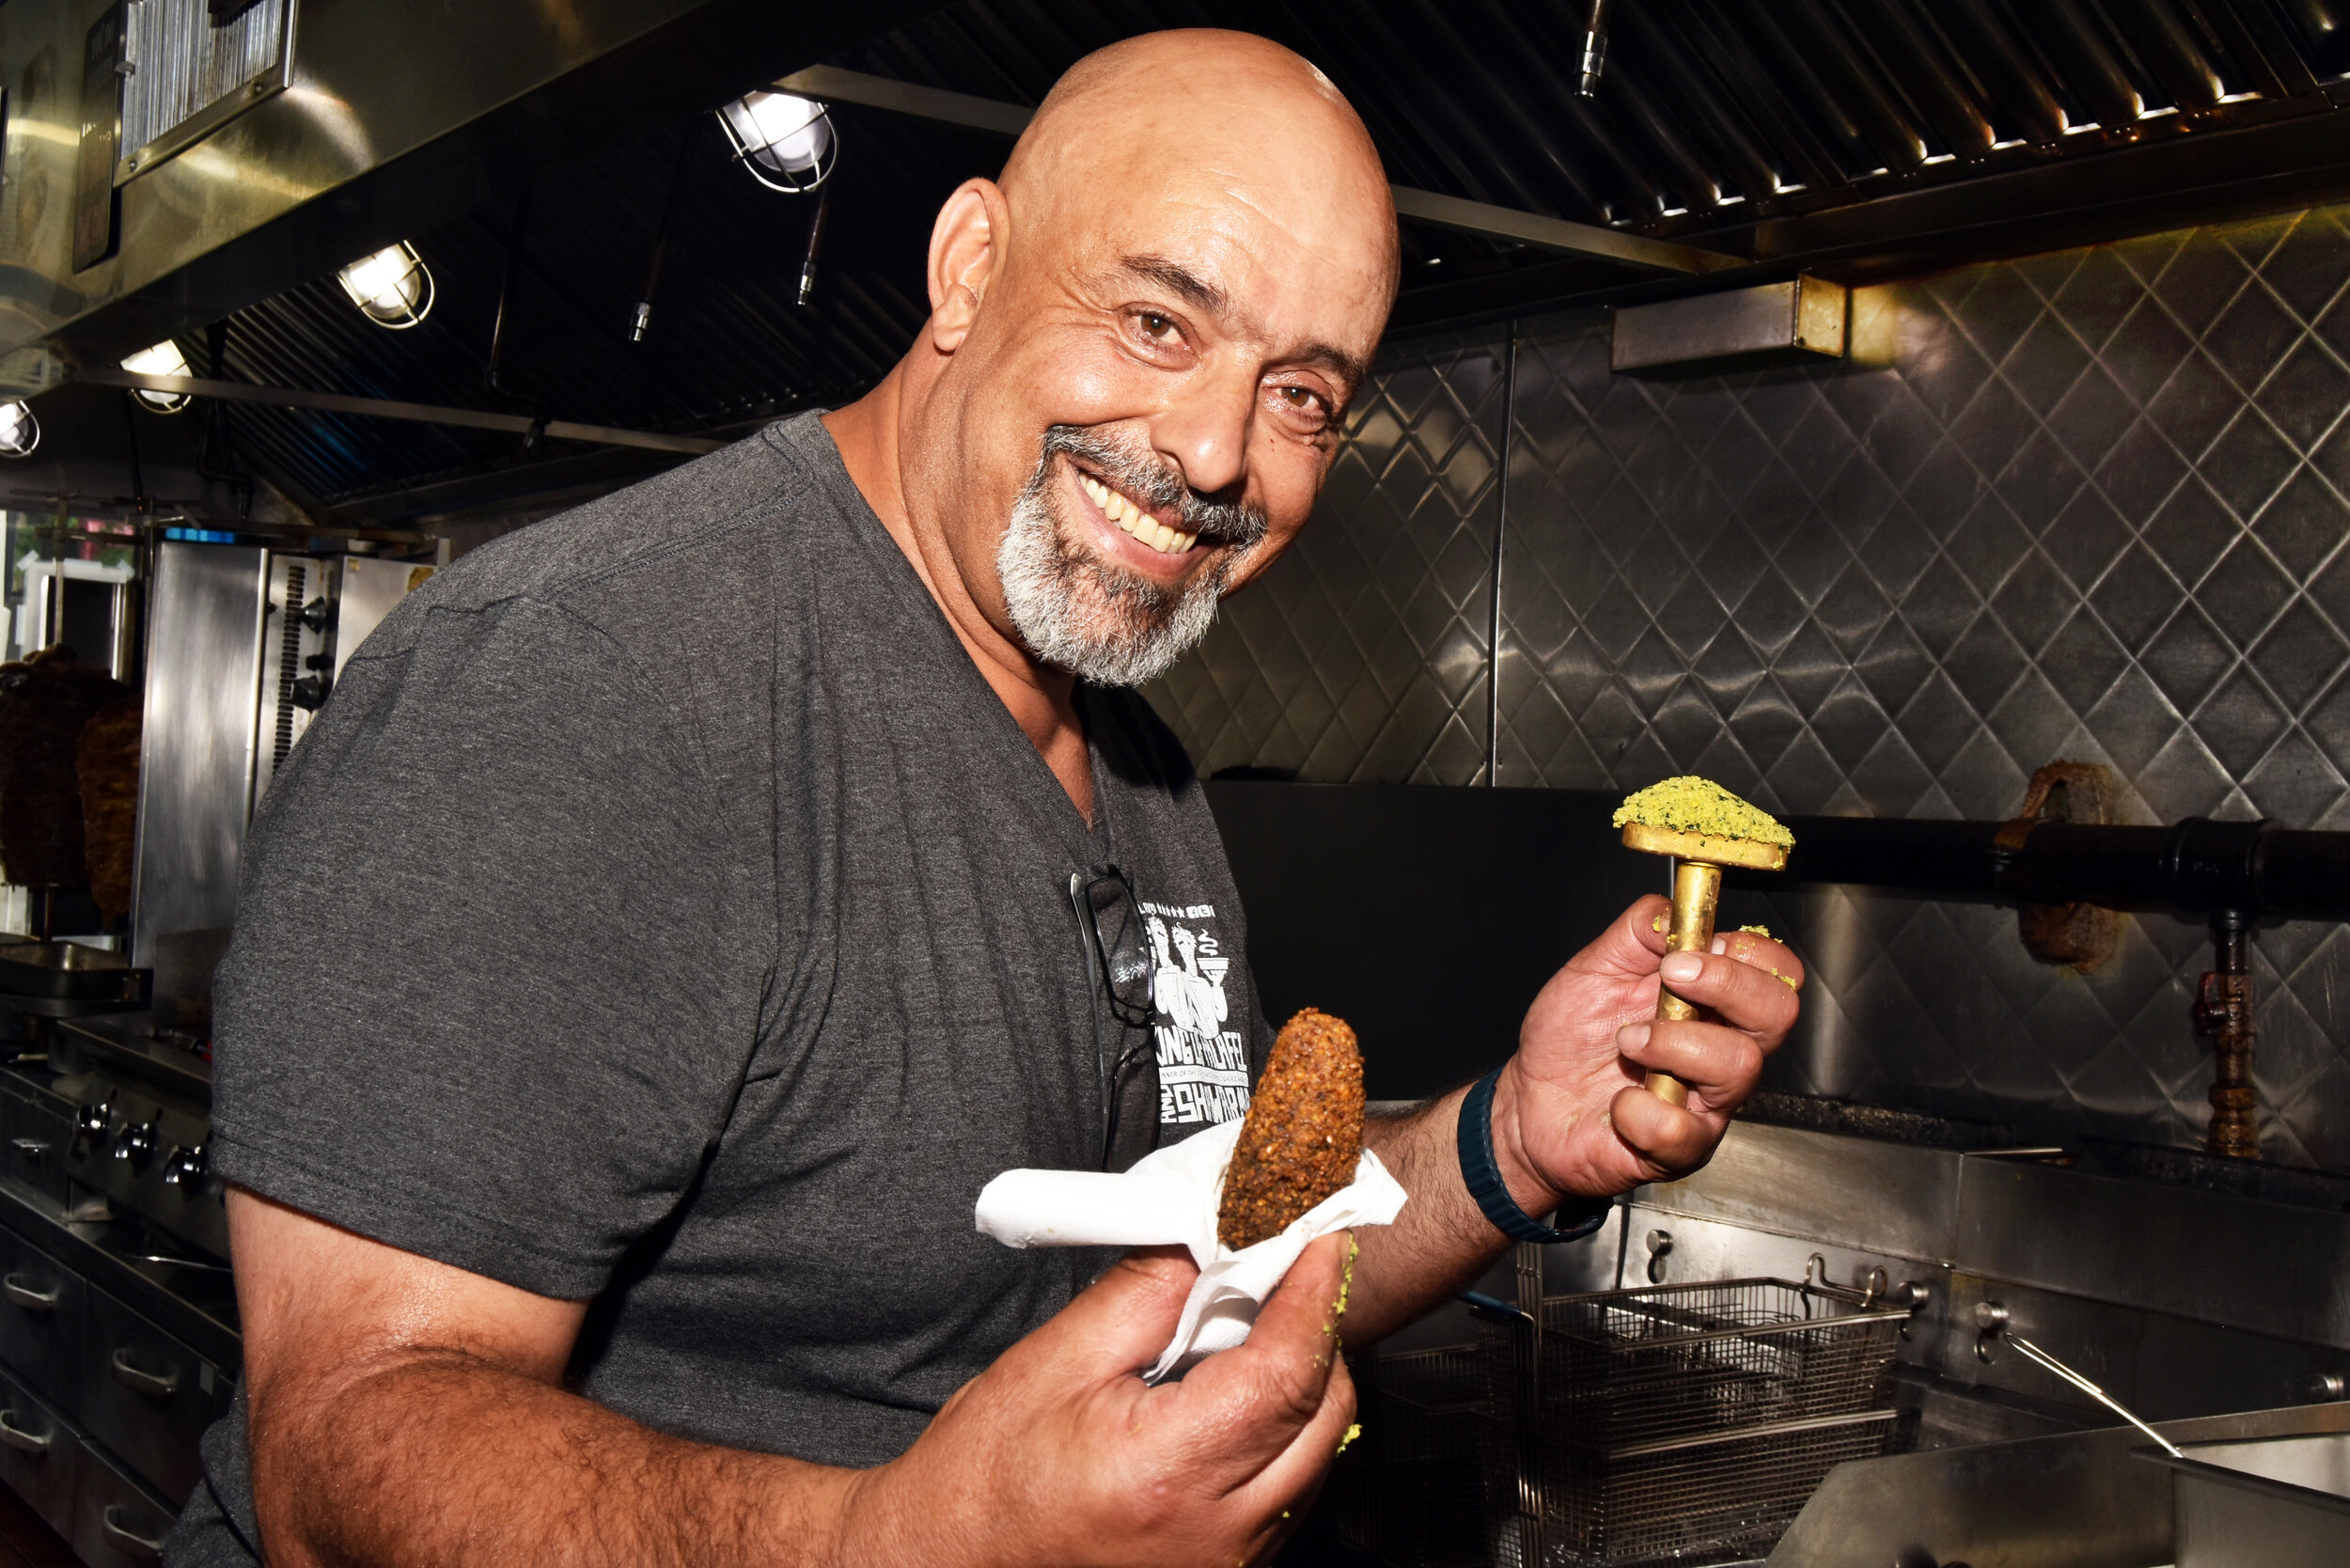  Freddy Zeideia is the owner of King of Falafel and Shawarma in Queens.  